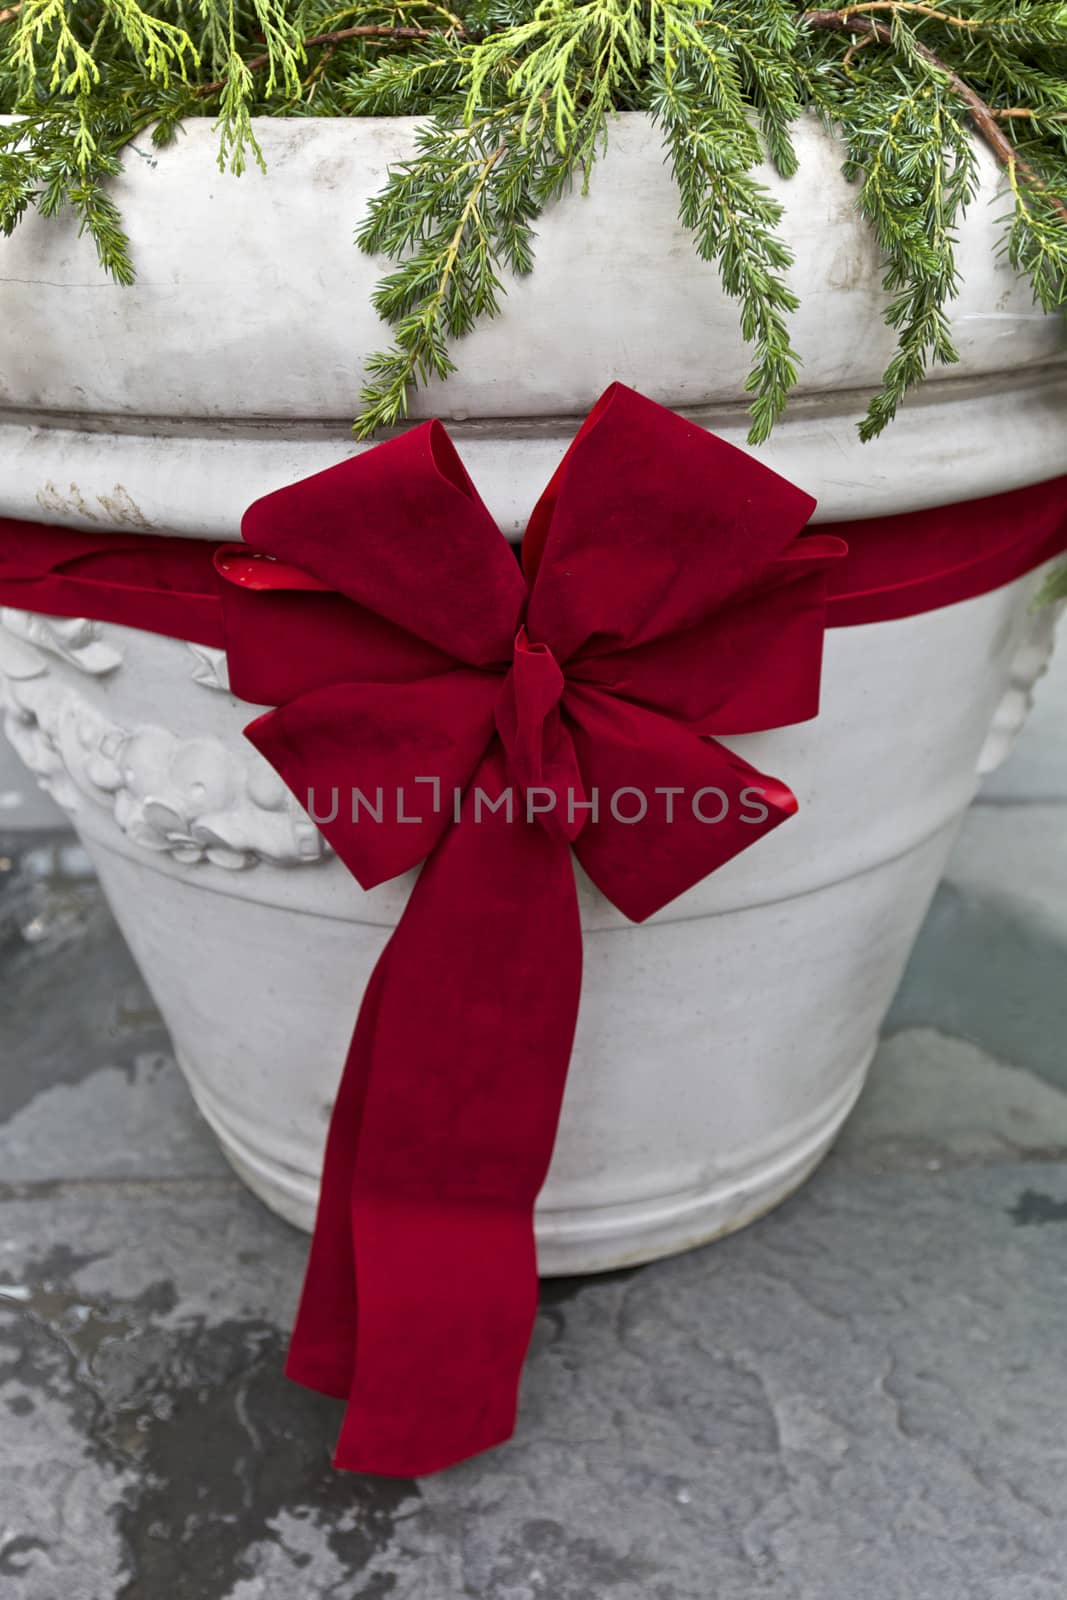 Christmas bow on a pot in New York City